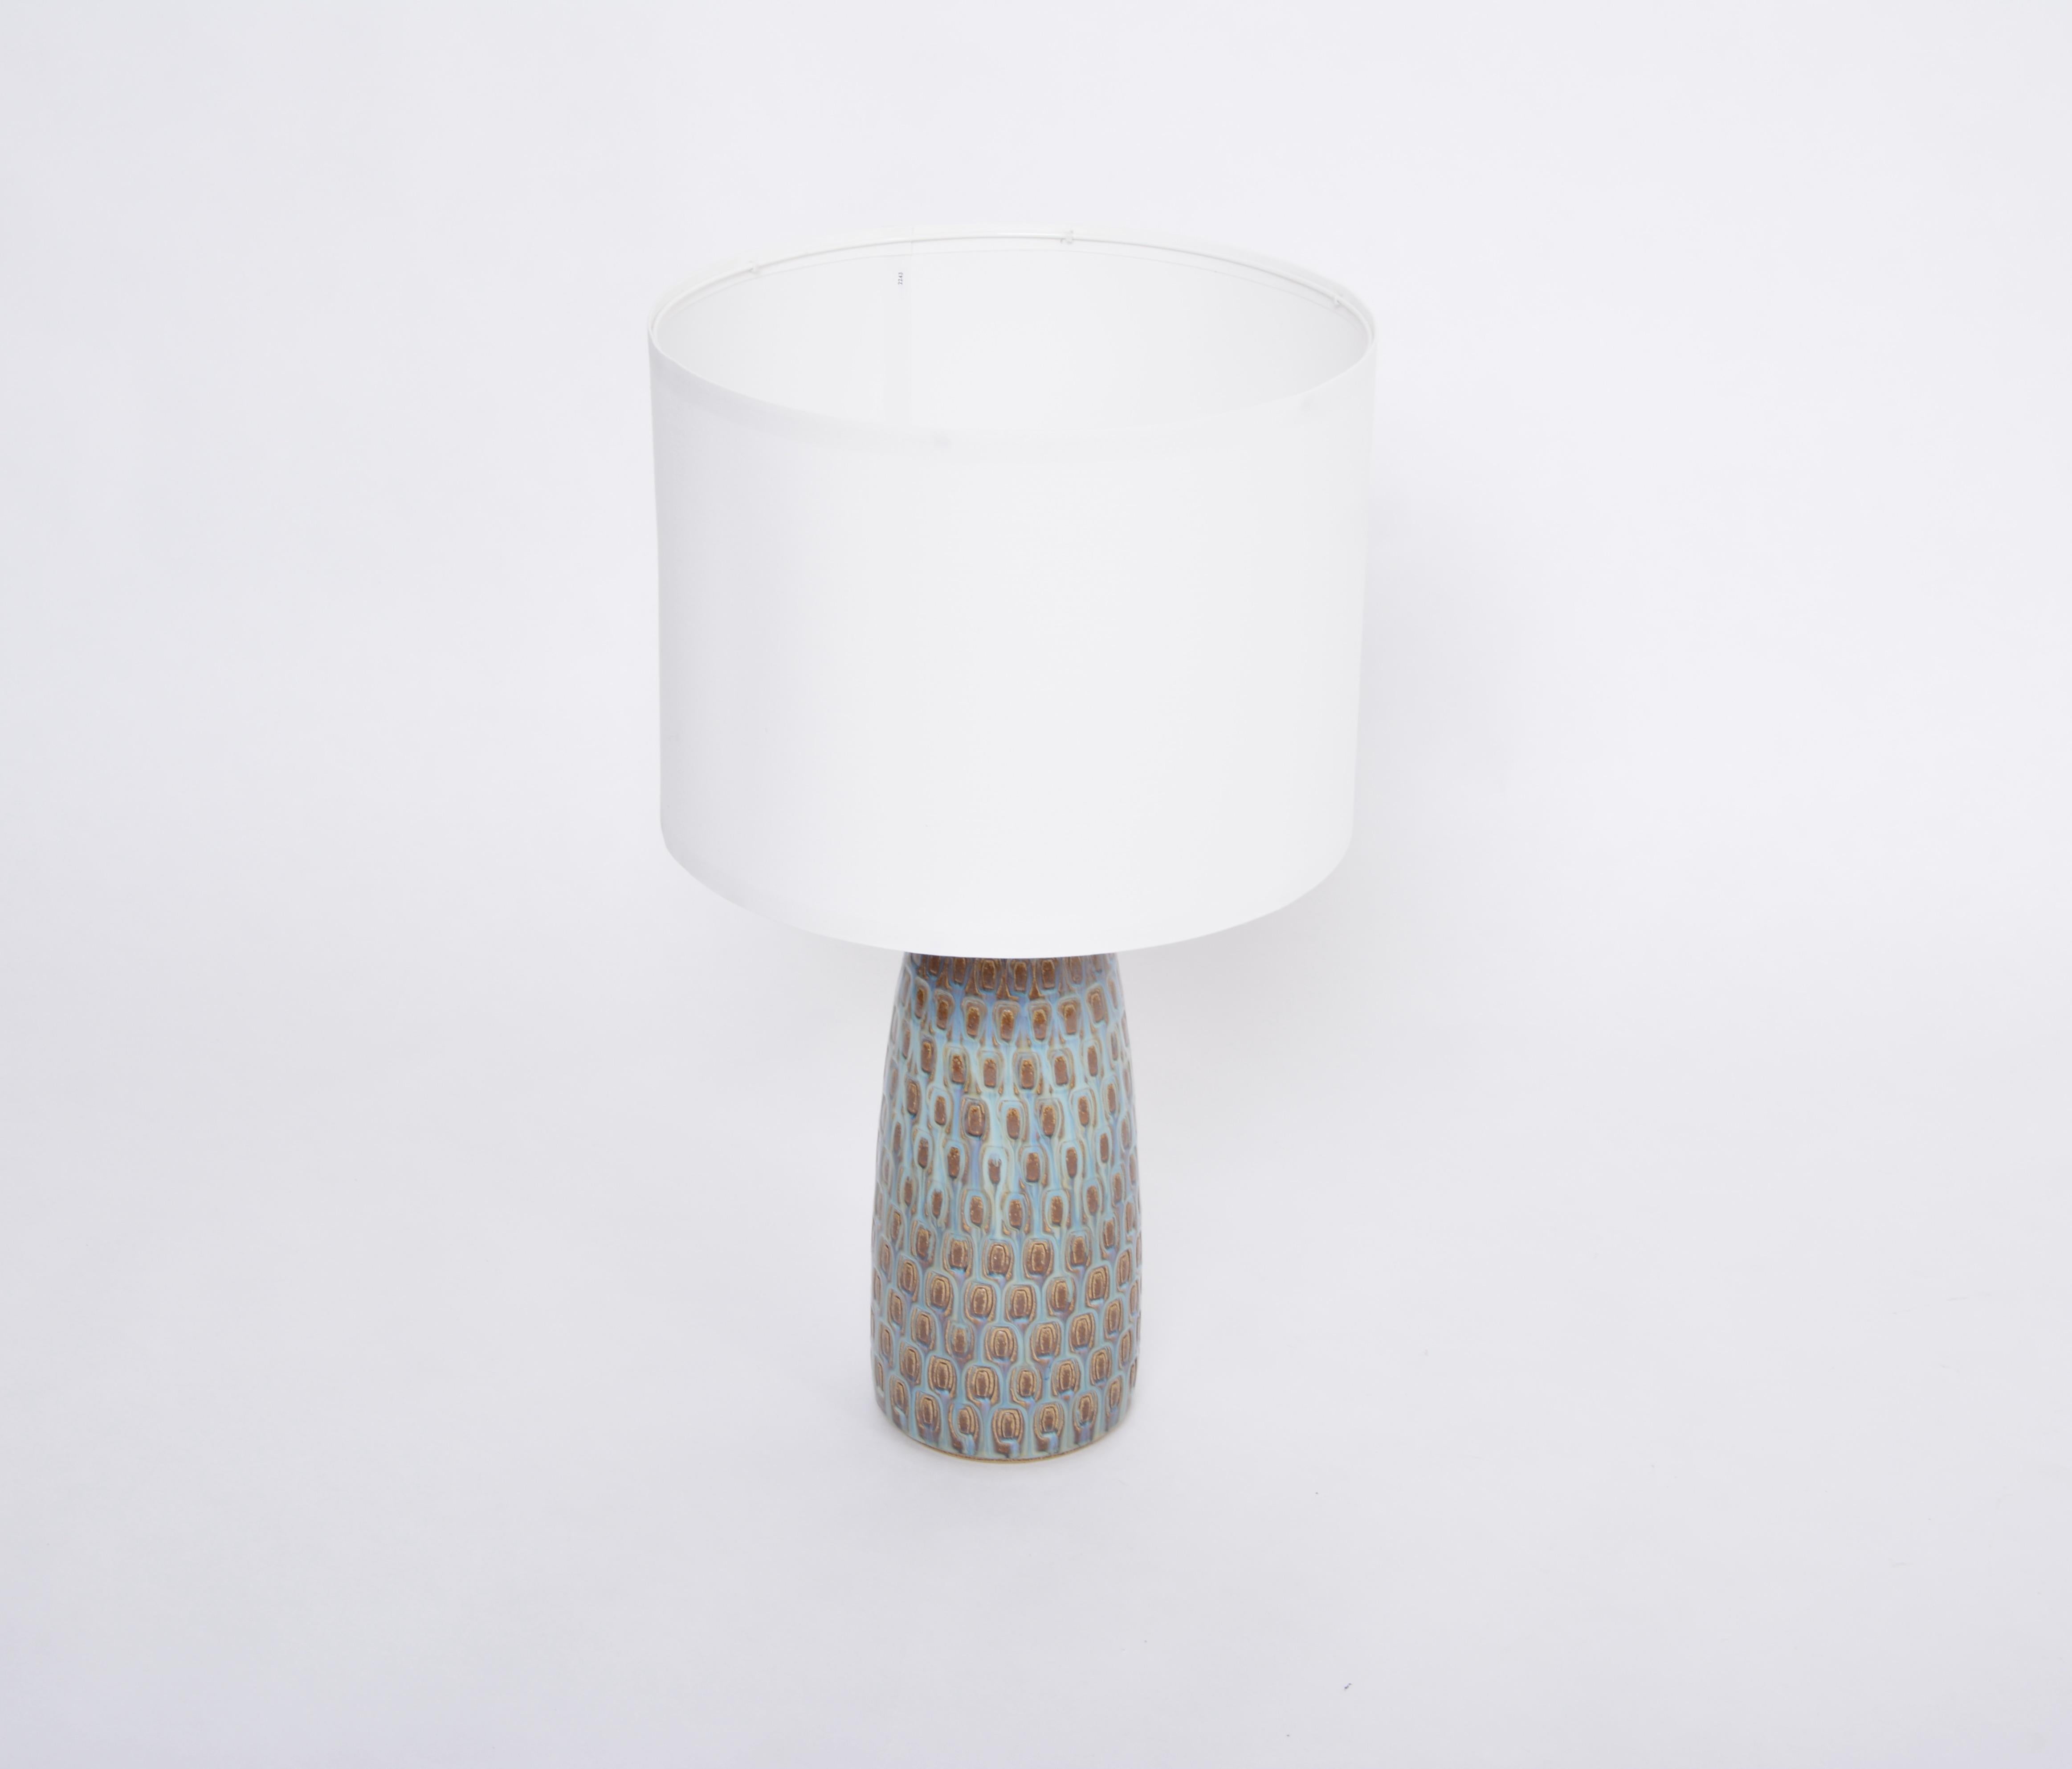 Tall Mid-Century Modern ceramic table lamp model 3017 by Einar Johansen for Soholm
This table lamp was designed by Einar Johansen and produced by Soholm Stentoj in Denmark in the 1960s. Gorgeous glazing in different shades of blue and white. The